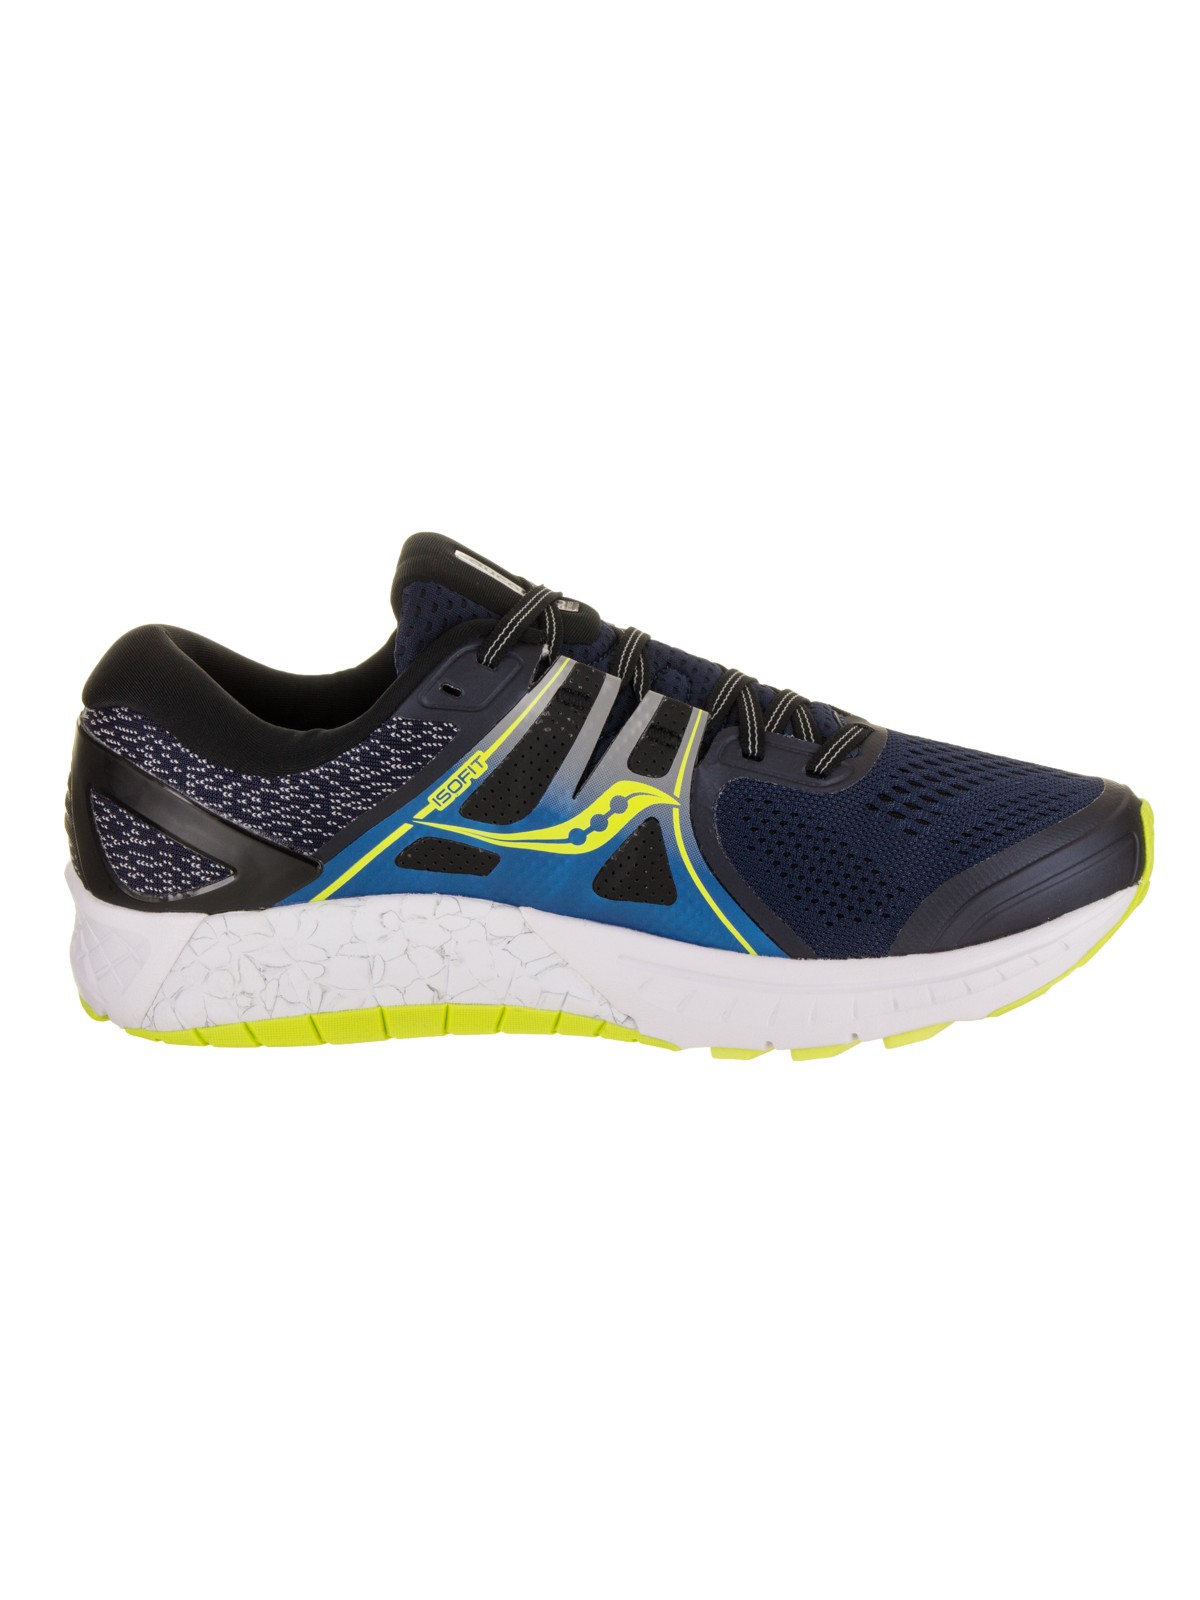 Saucony Mens Omni ISO Road Running Shoe Sneaker - Navy/Blue/Citron - Size 9 - image 2 of 5